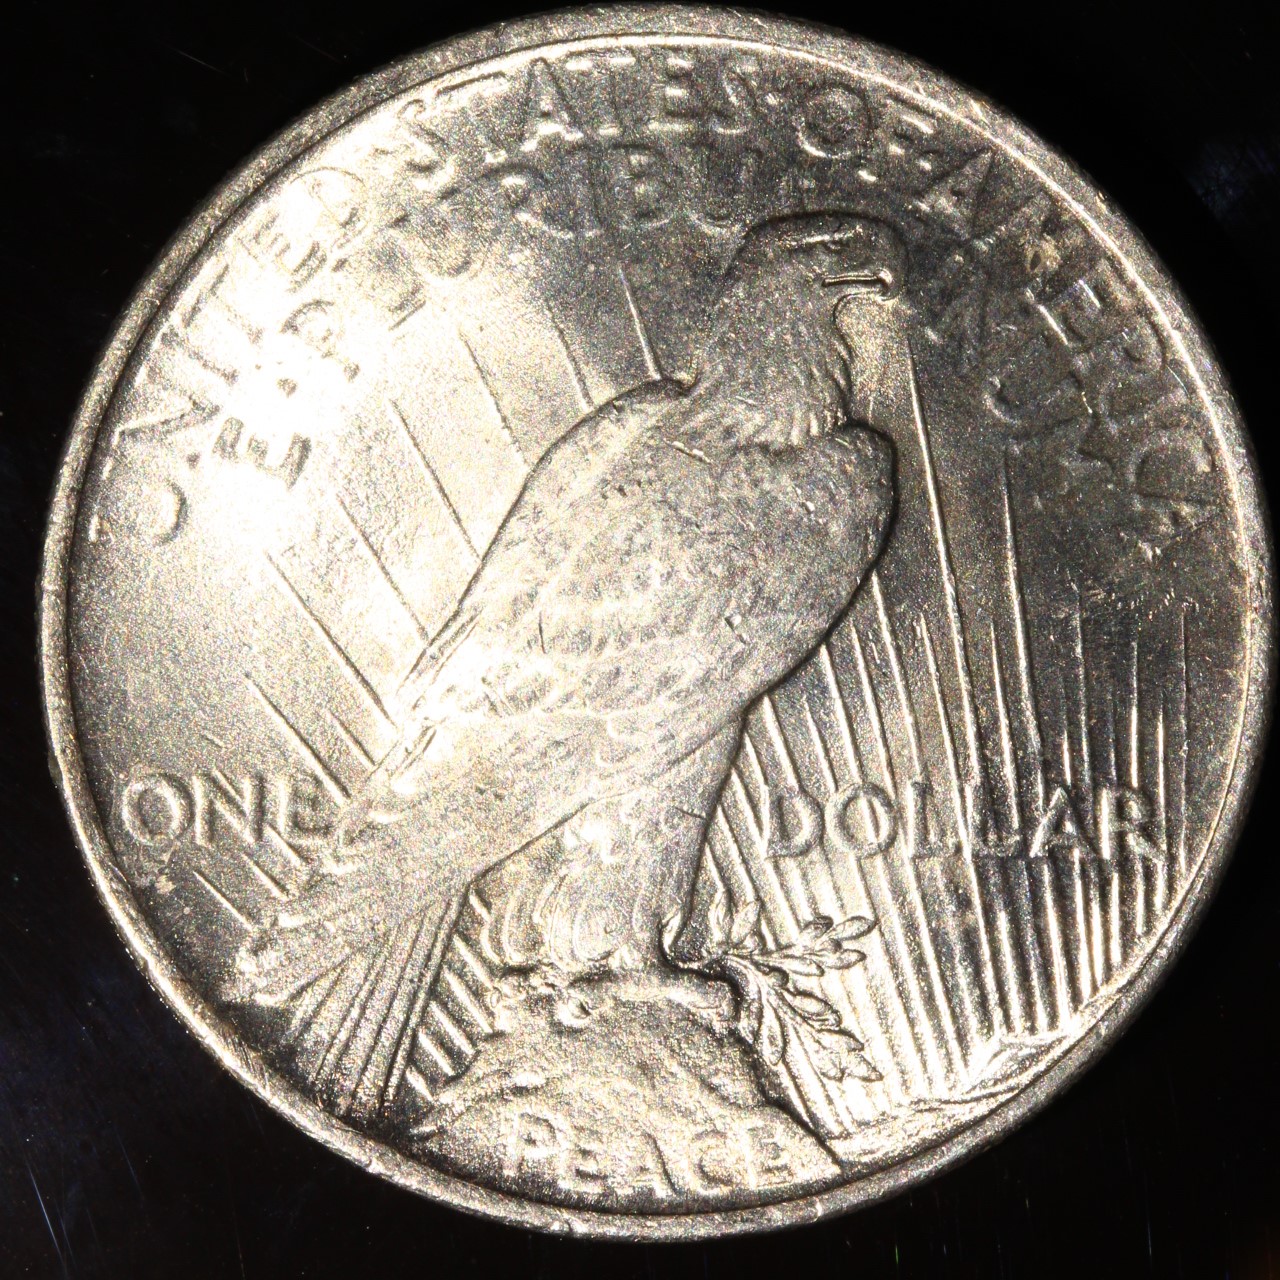 GoodLife Auctions - Lot 2071, 1922 Peace 1 Dollar, F-16 For Sale